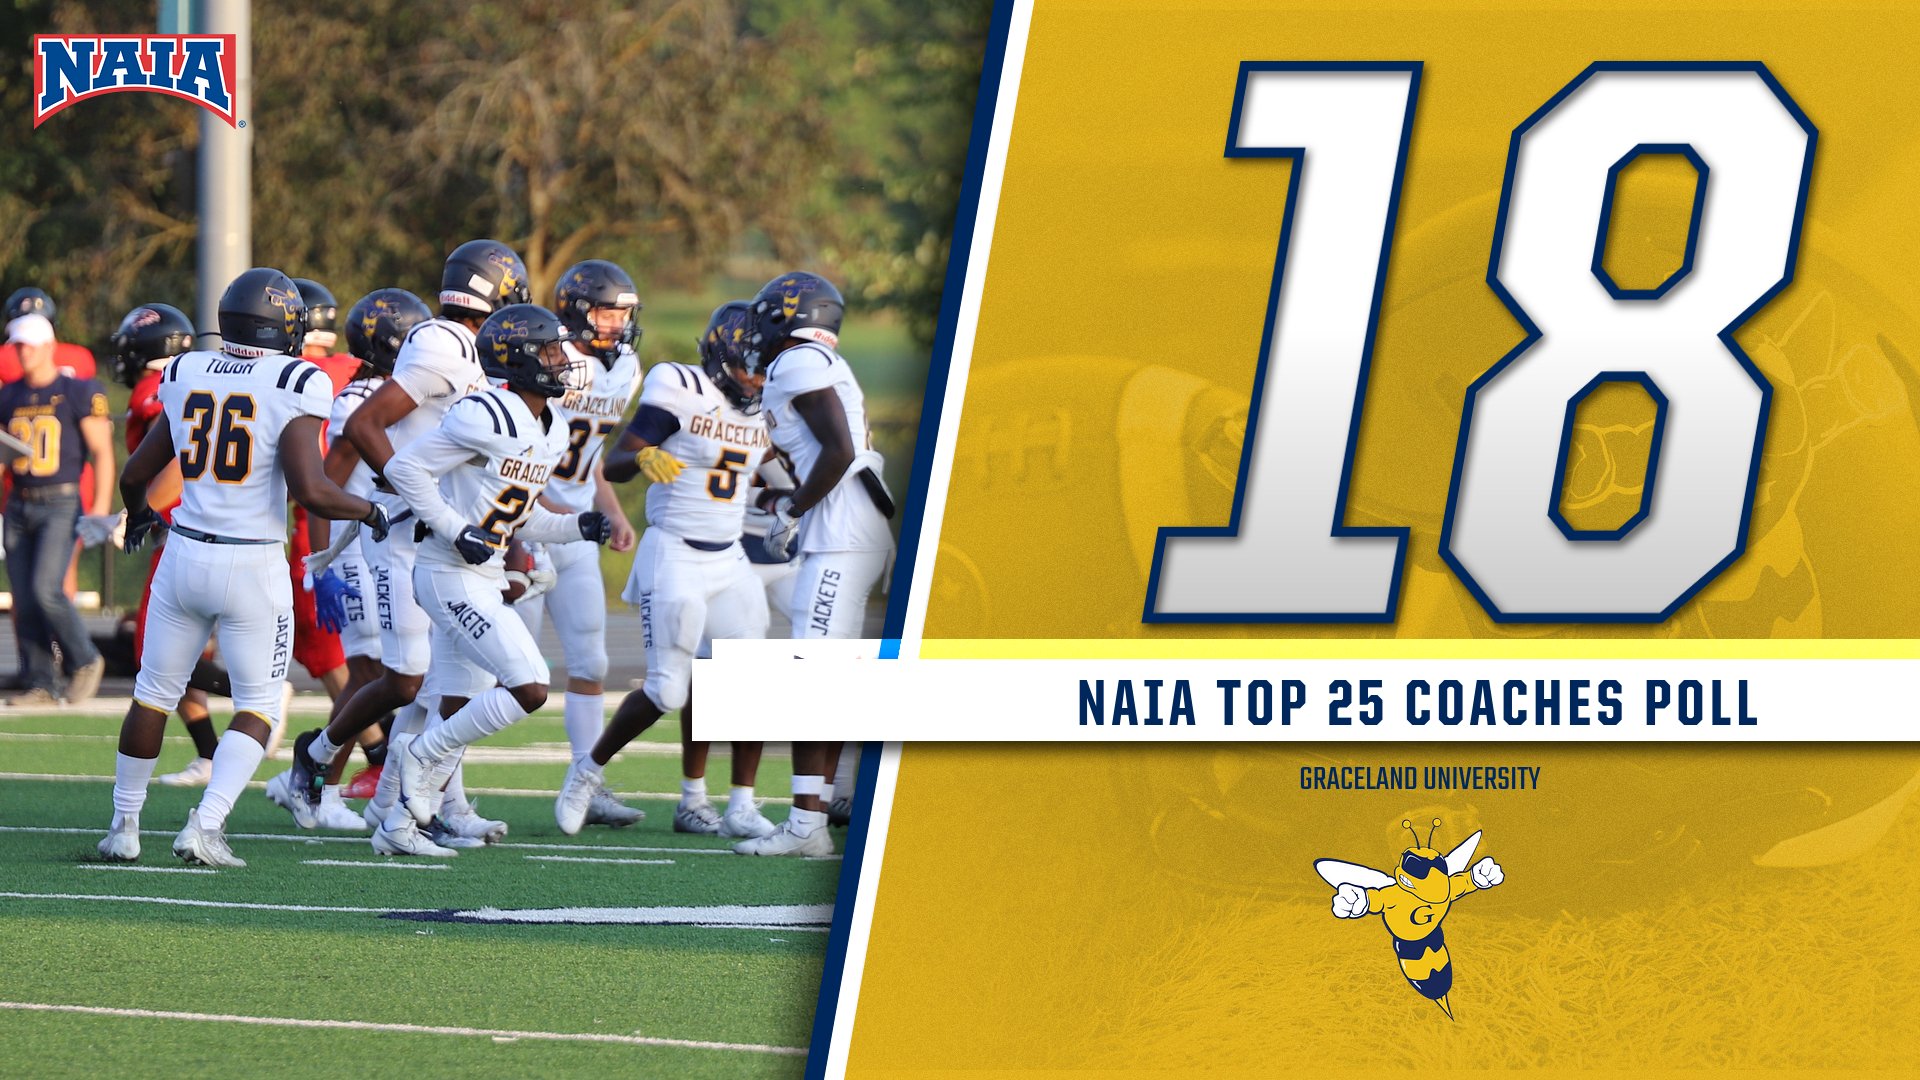 Graceland Football Jumps to No. 18 on the NAIA Top 25